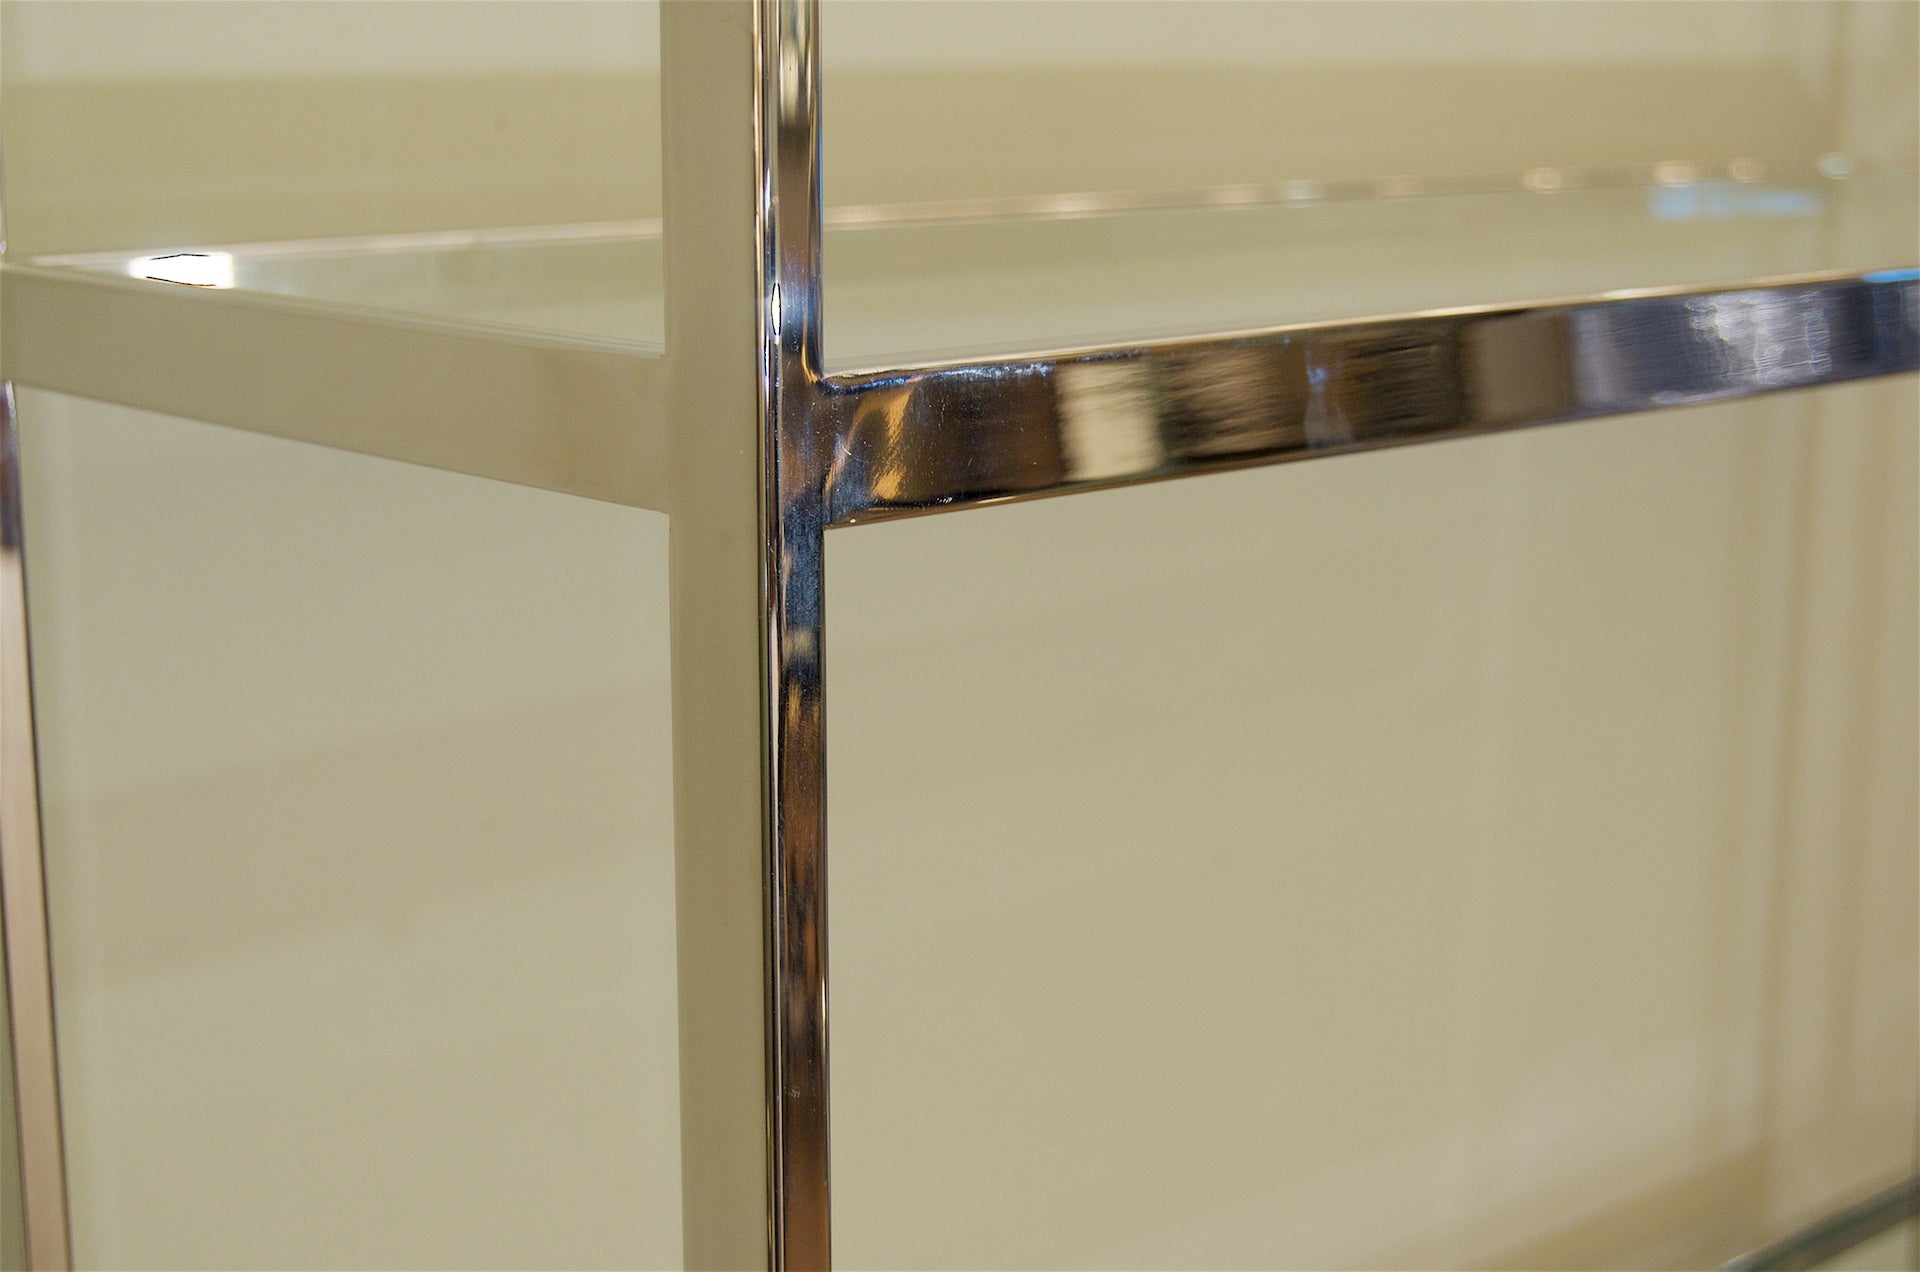 Chrome and Glass Etagere in the Style of Milo Baughman